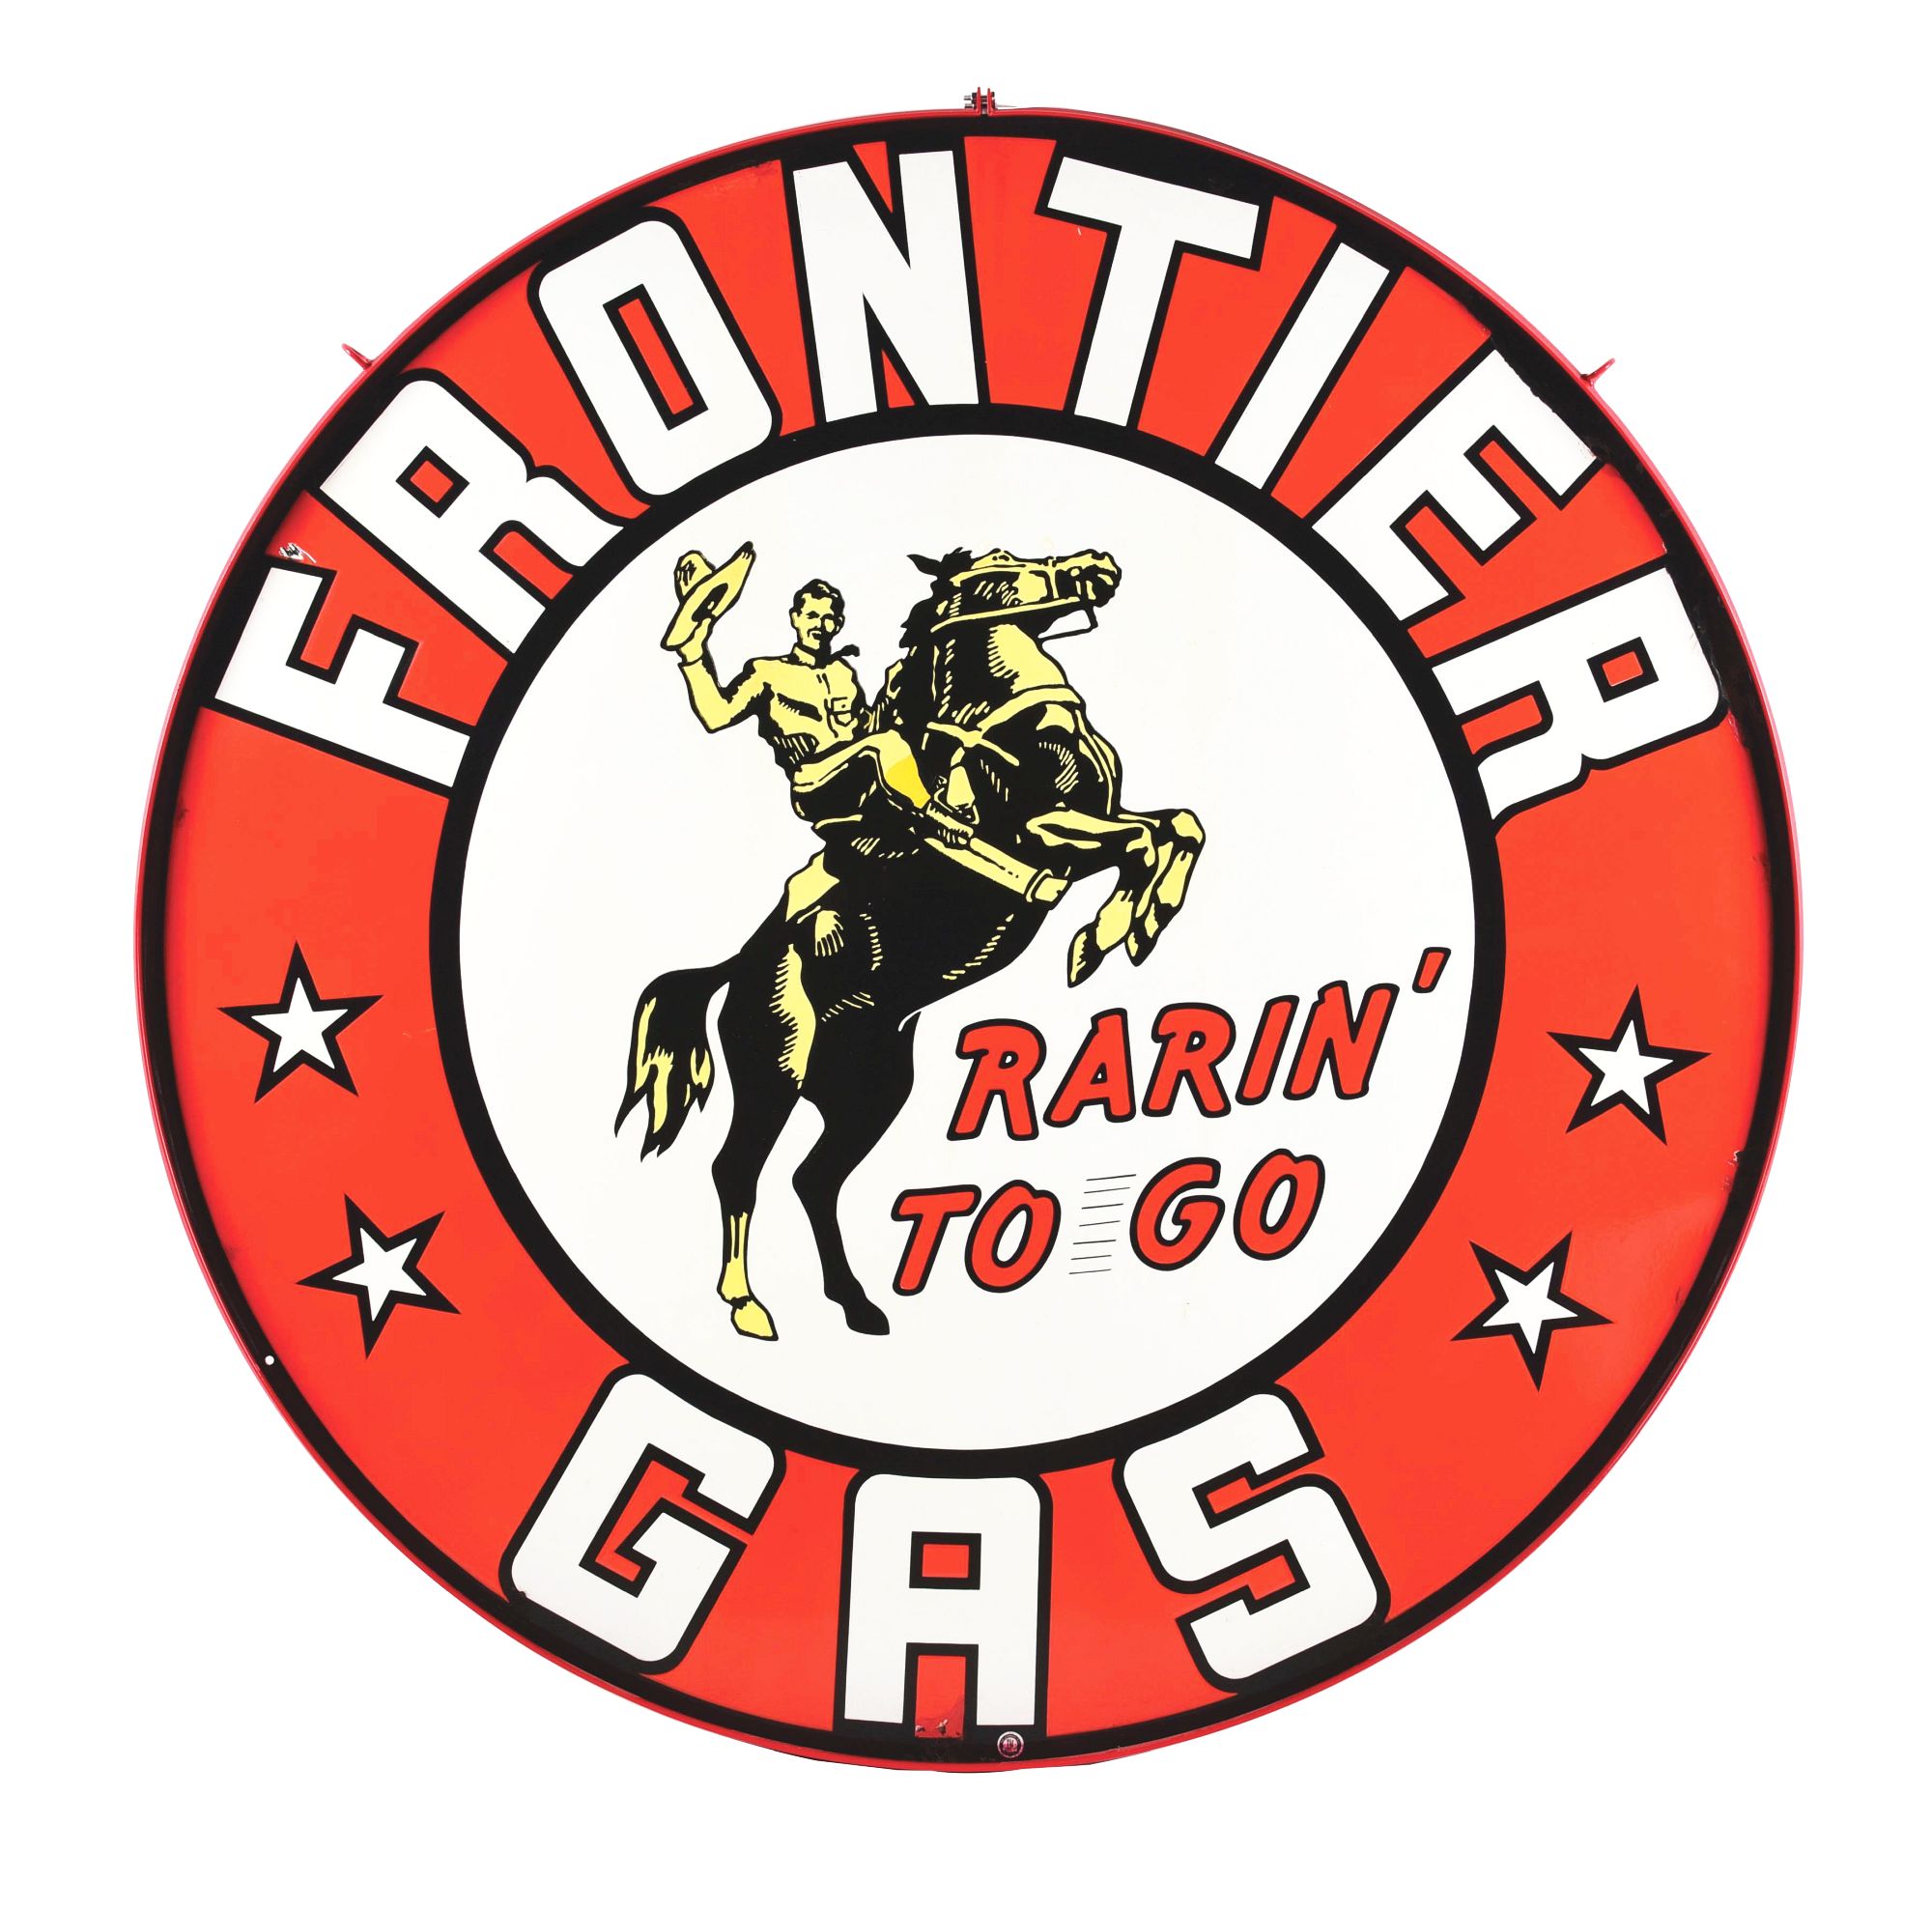 Frontier Gas porcelain sign, estimated at $40,000-$80,000 at Morphy.
